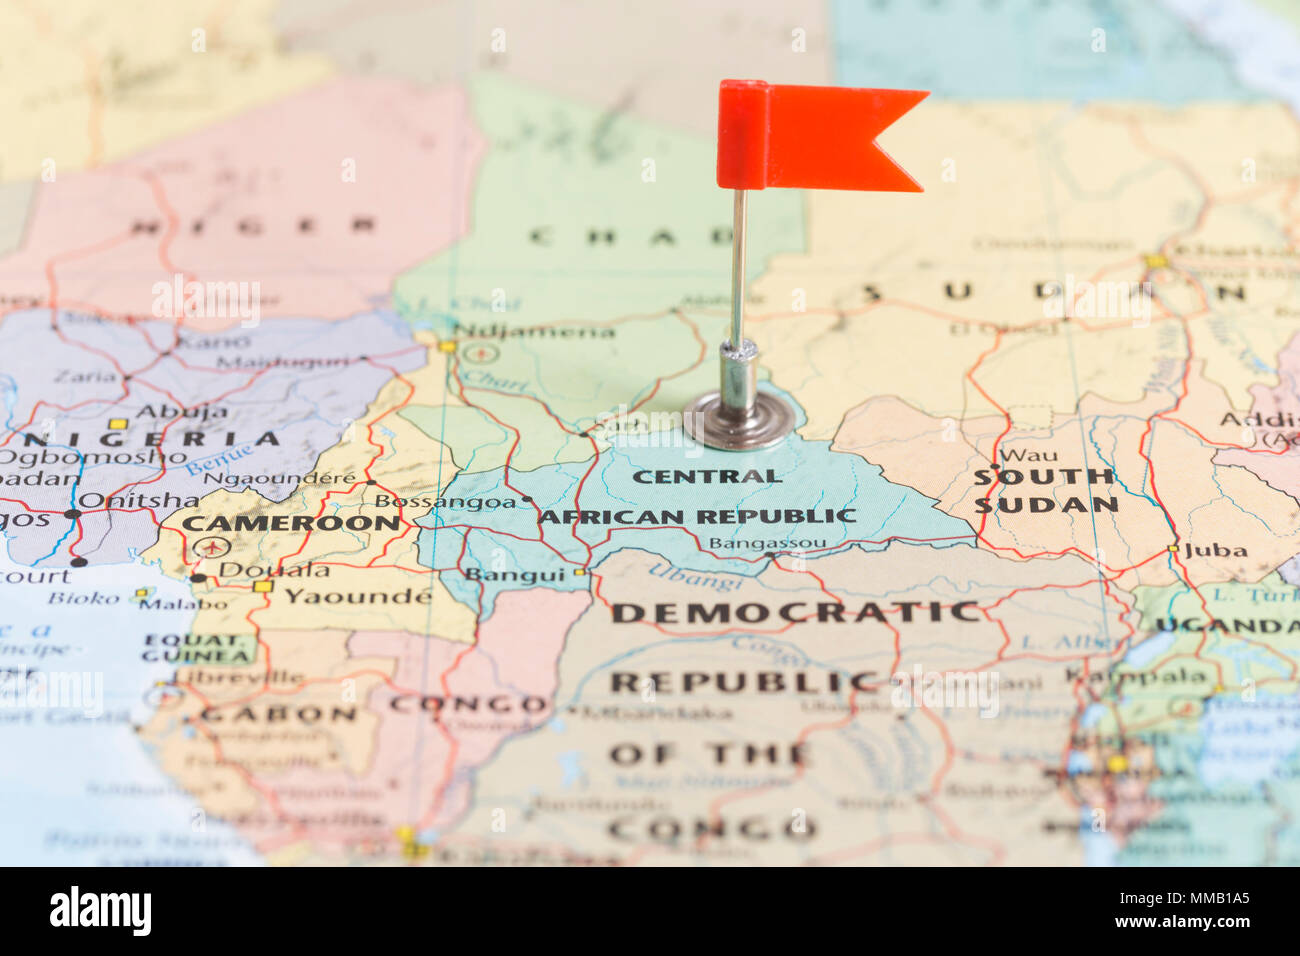 Small red flag marking the African country of the Central African Republic on a world map. Stock Photo